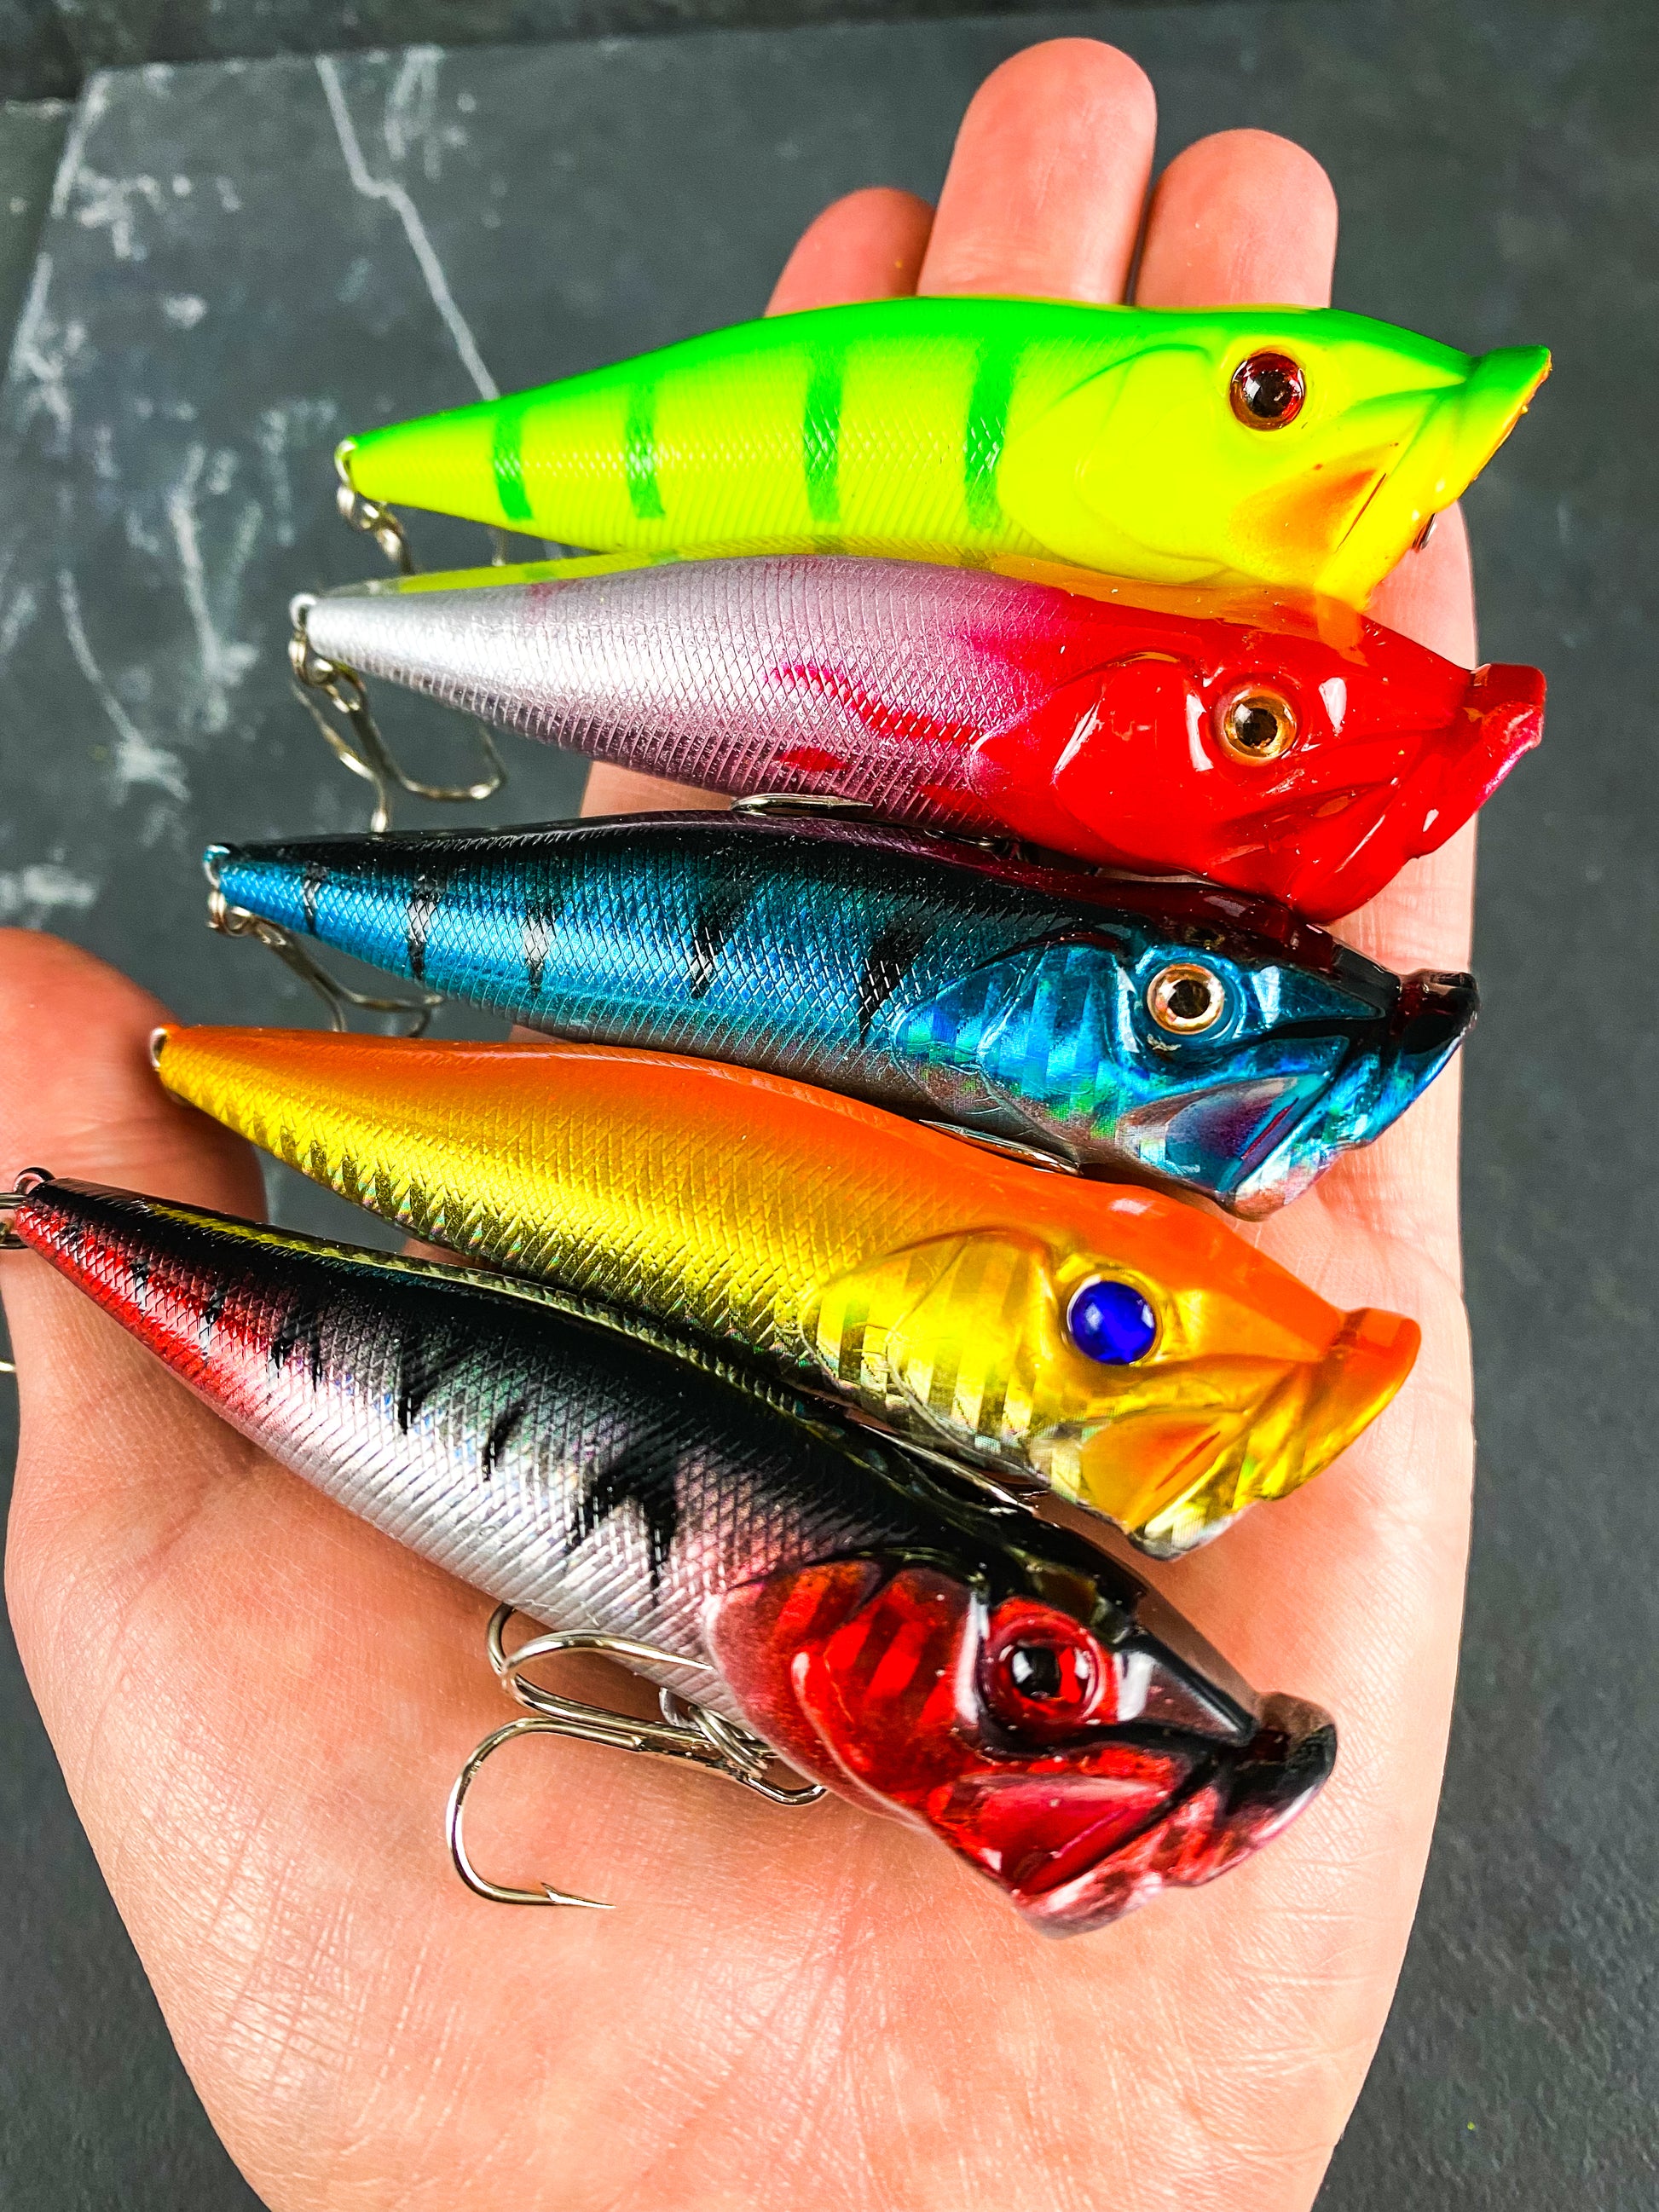 5pcs Fly Fishing Poppers Topwater Fishing Lures Bass Crappie